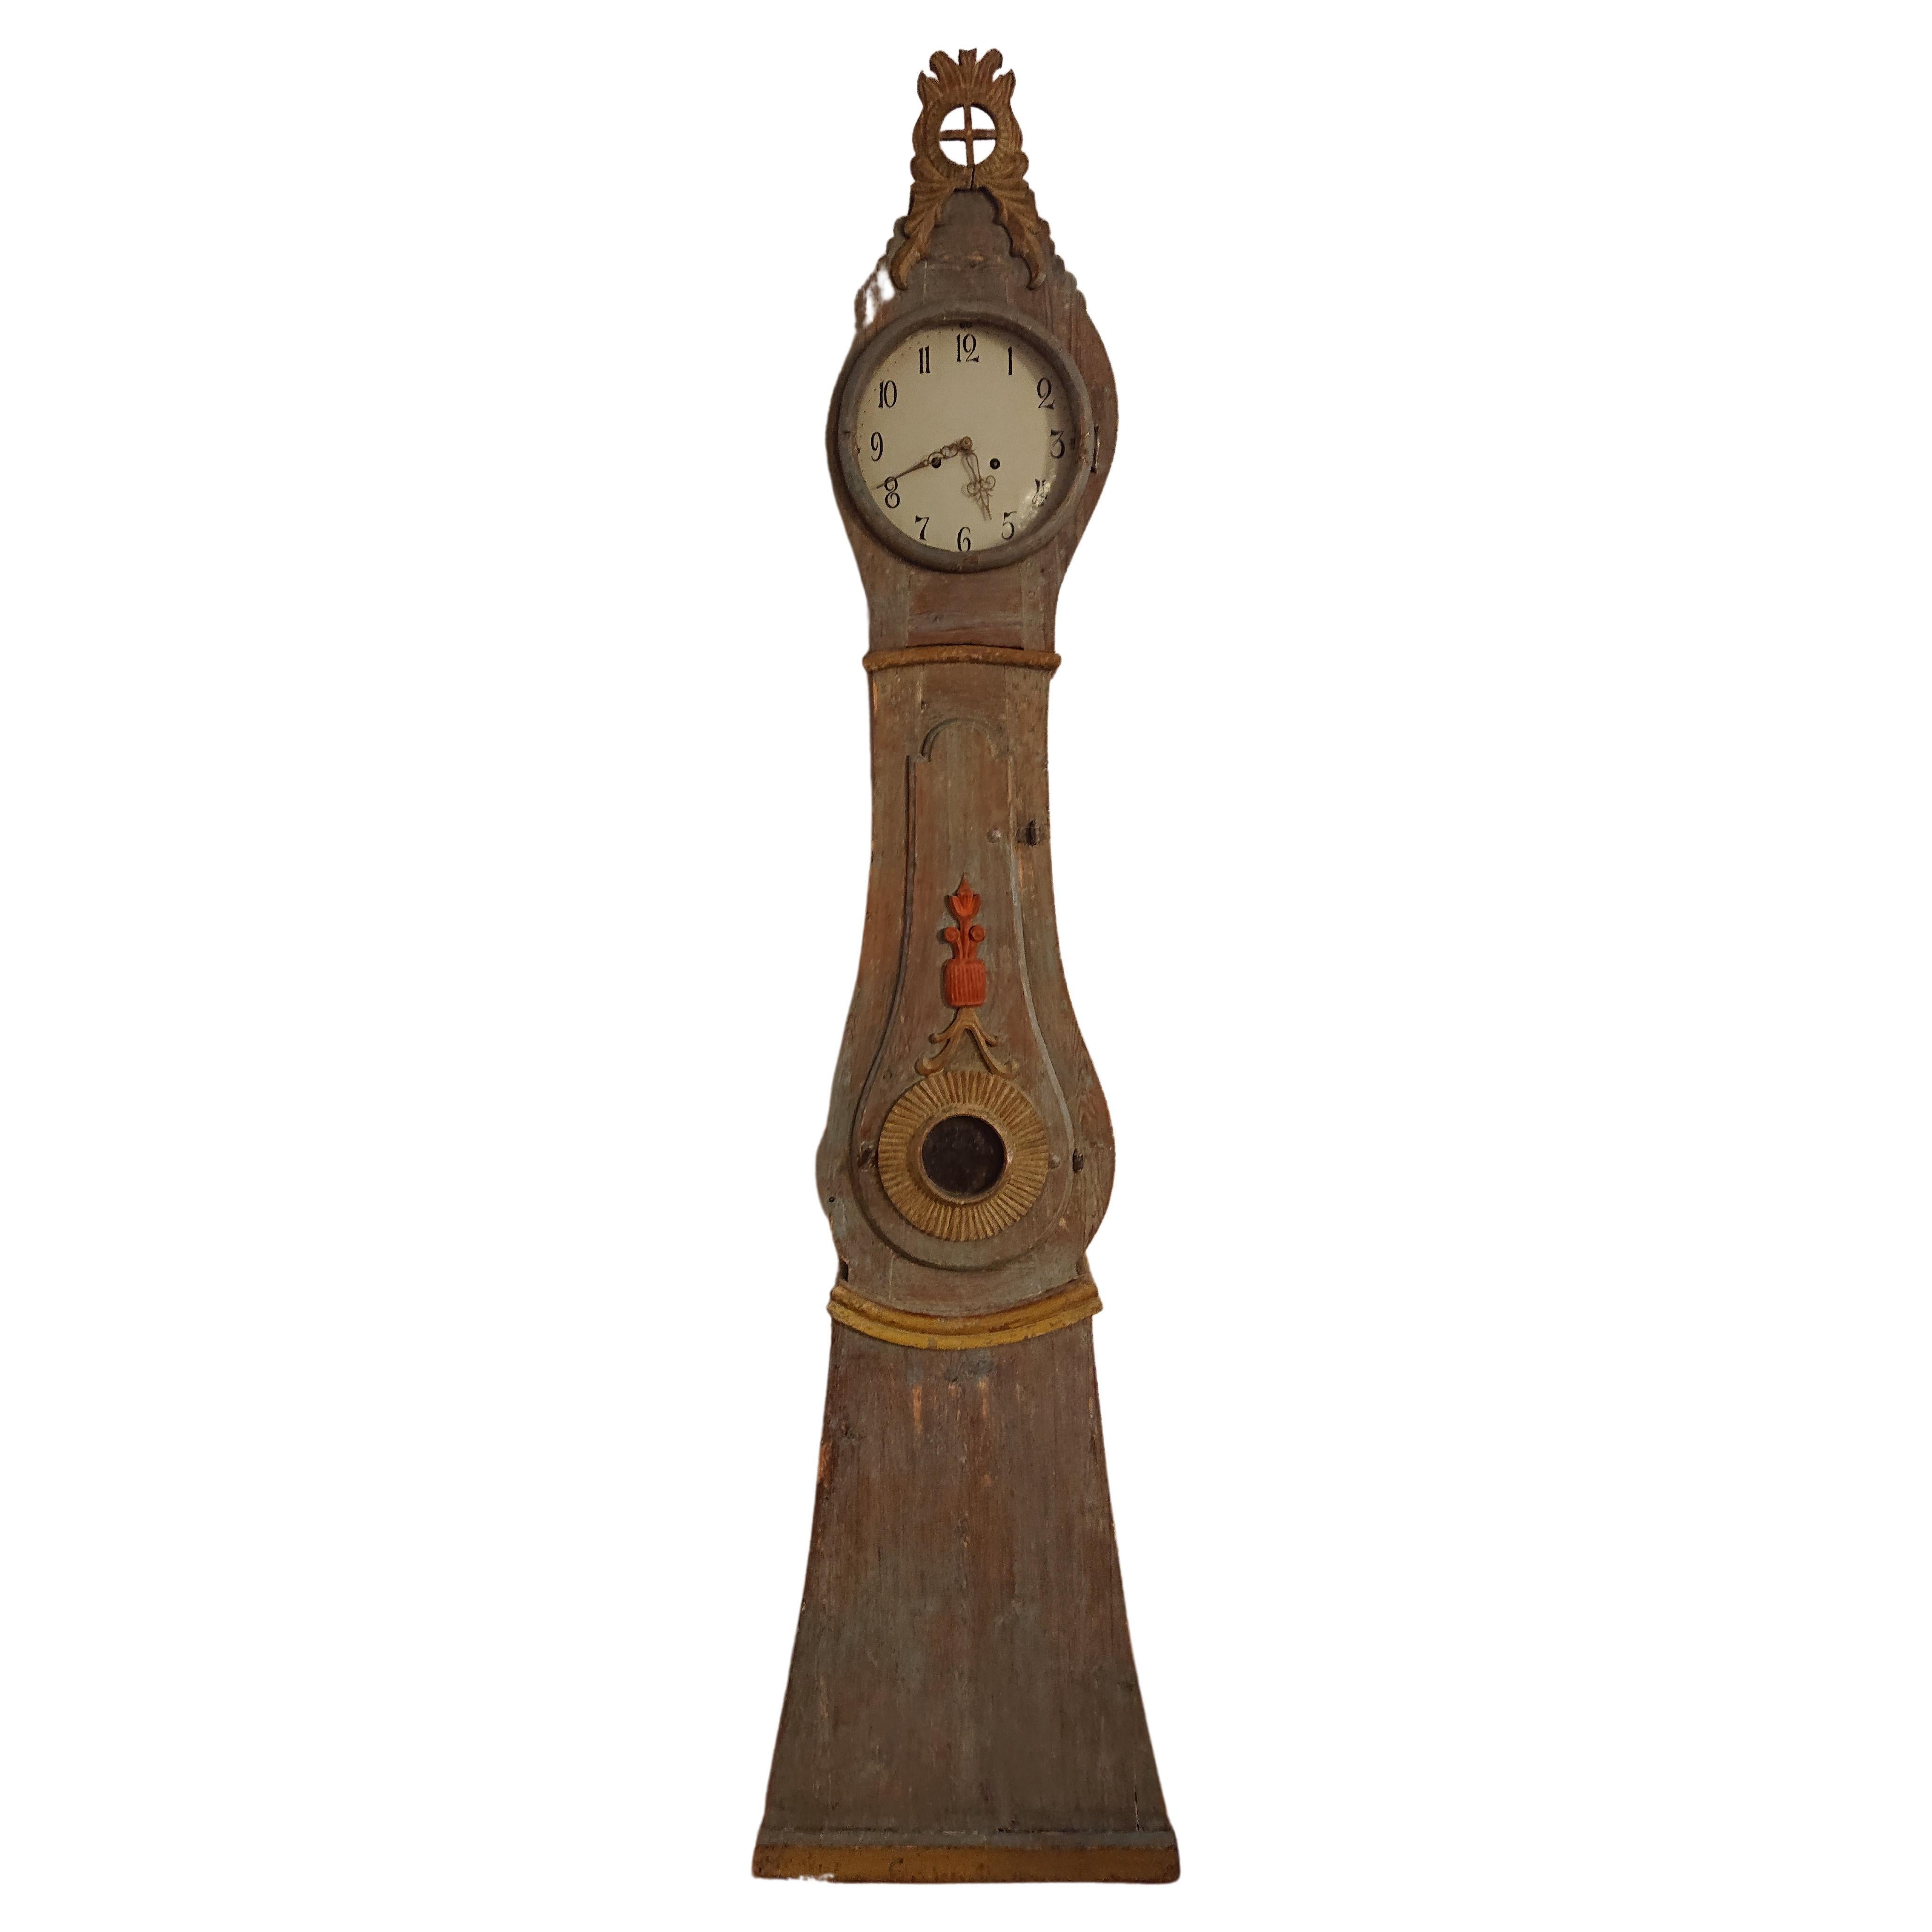 19th century Rococo tall case clock from Boden Norrbotten, Northern Sweden. Made in wood. Nice details and carvings in shape of flowers and leaves. The Middle of the case has a windowed door to access the inside. This Piece has been hand scraped